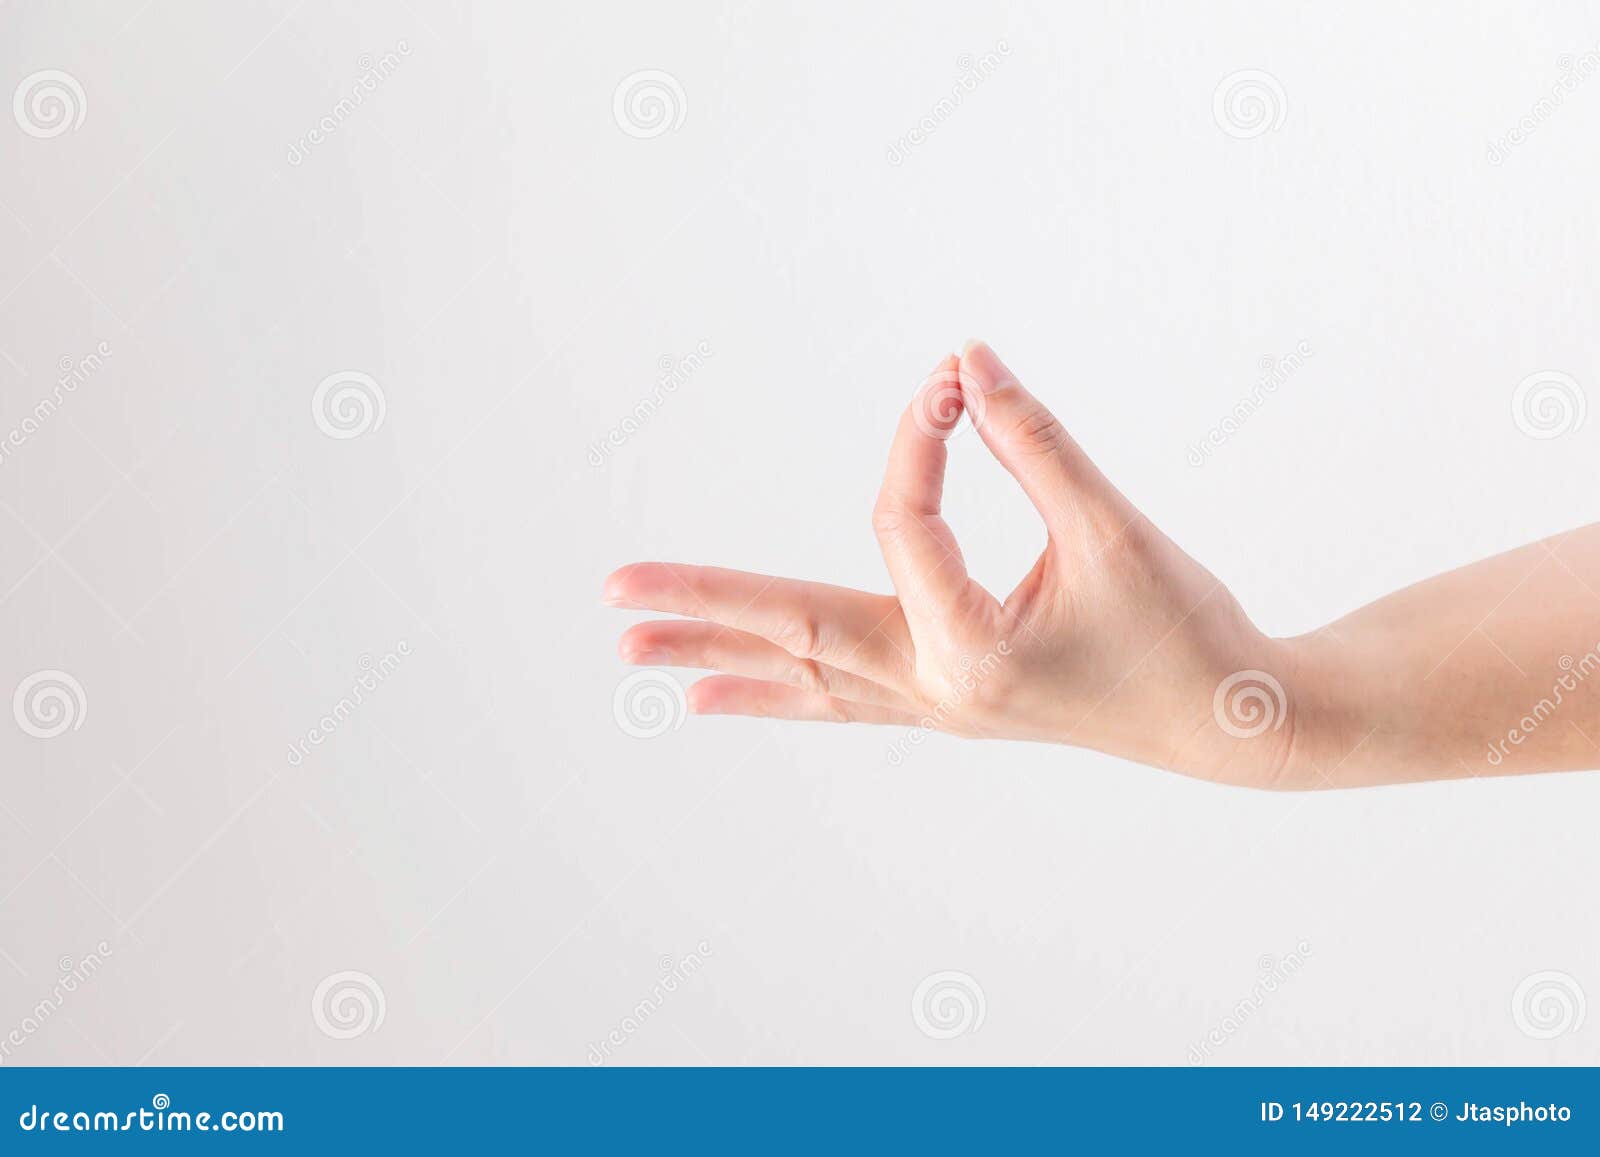 hand supine and touching tip of thumb and forefinger together on white background; posturing like holding very small, thin and